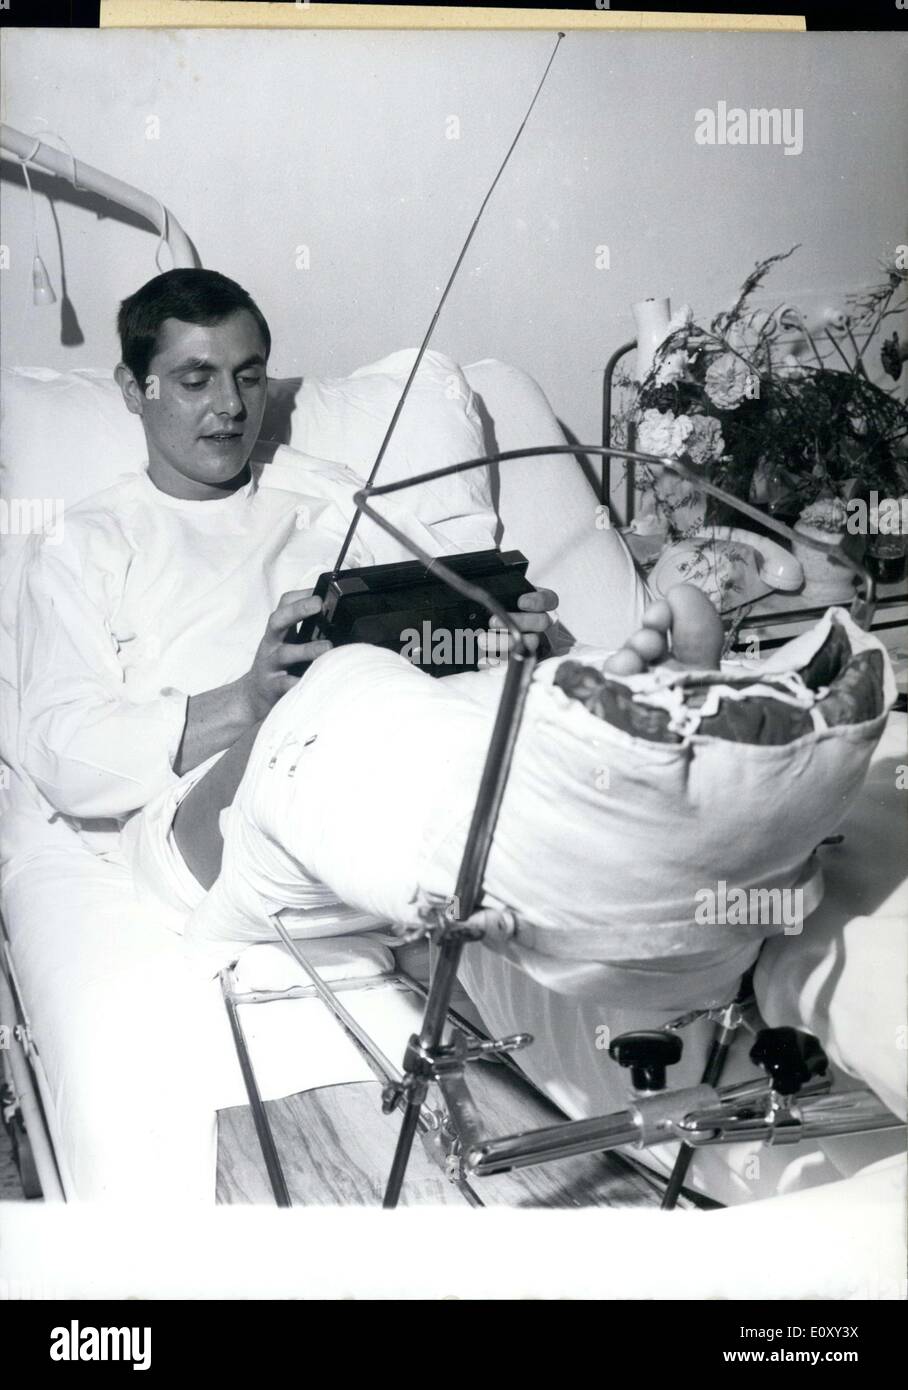 Jan. 20, 1968 - Pictured is Borussia Monchengladbach soccer player Peter Meyer. He was in the hospital for a broken leg. He is listening to a soccer game on the radio. Stock Photo